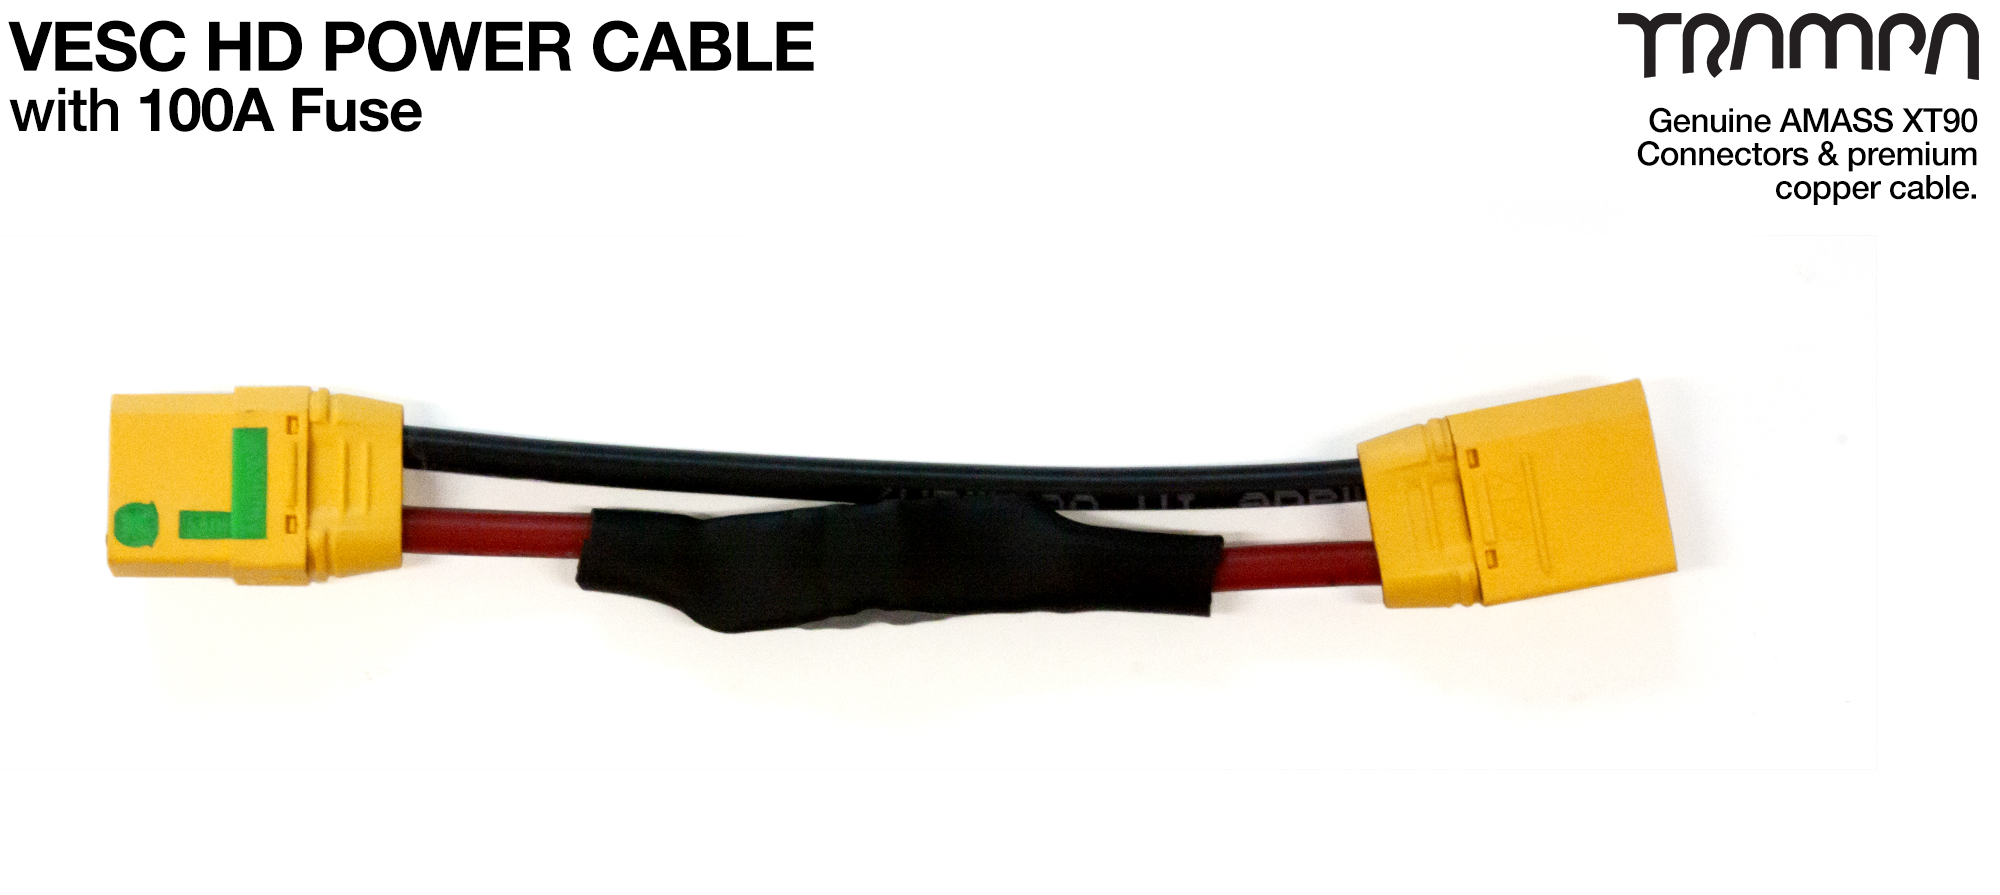 SINGLE VESC HD Power Cable with 100A FUSE